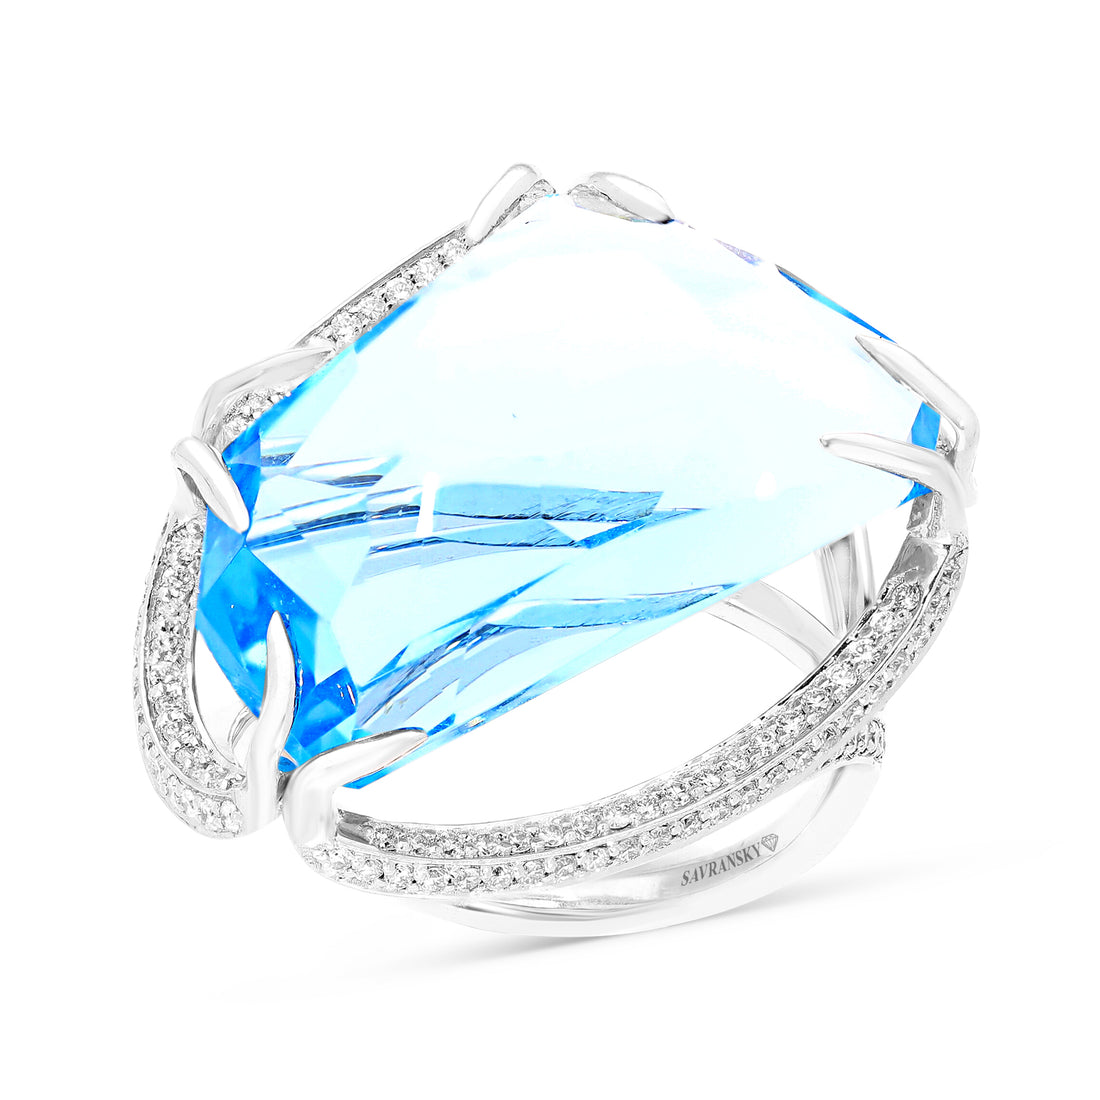 Special Cut Blue Topaz Halo Ring - 33.90 Carat